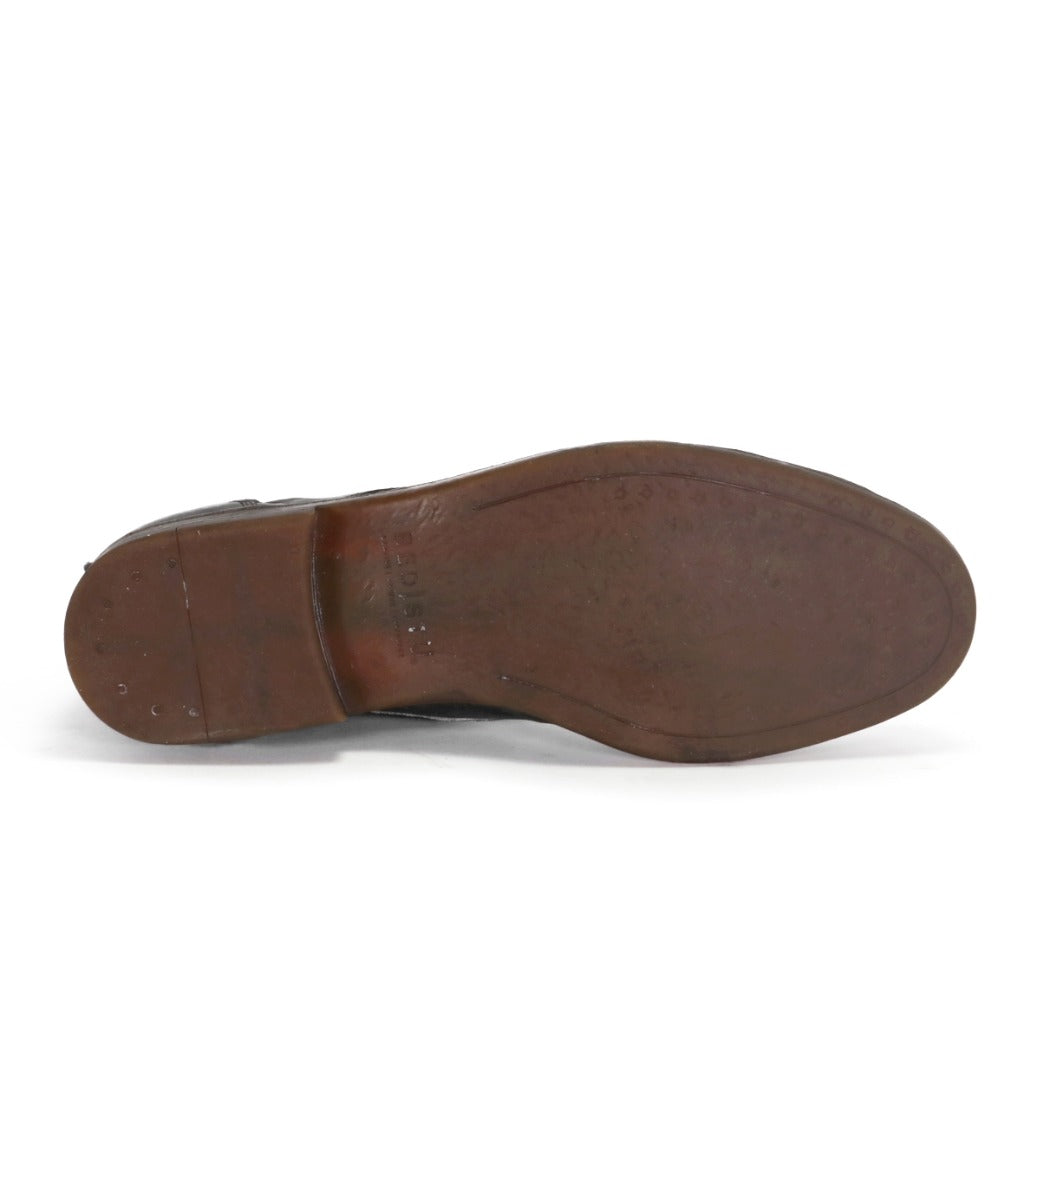 Bottom view of a worn brown vegetable-tanned Illiad shoe sole by Bed Stu.